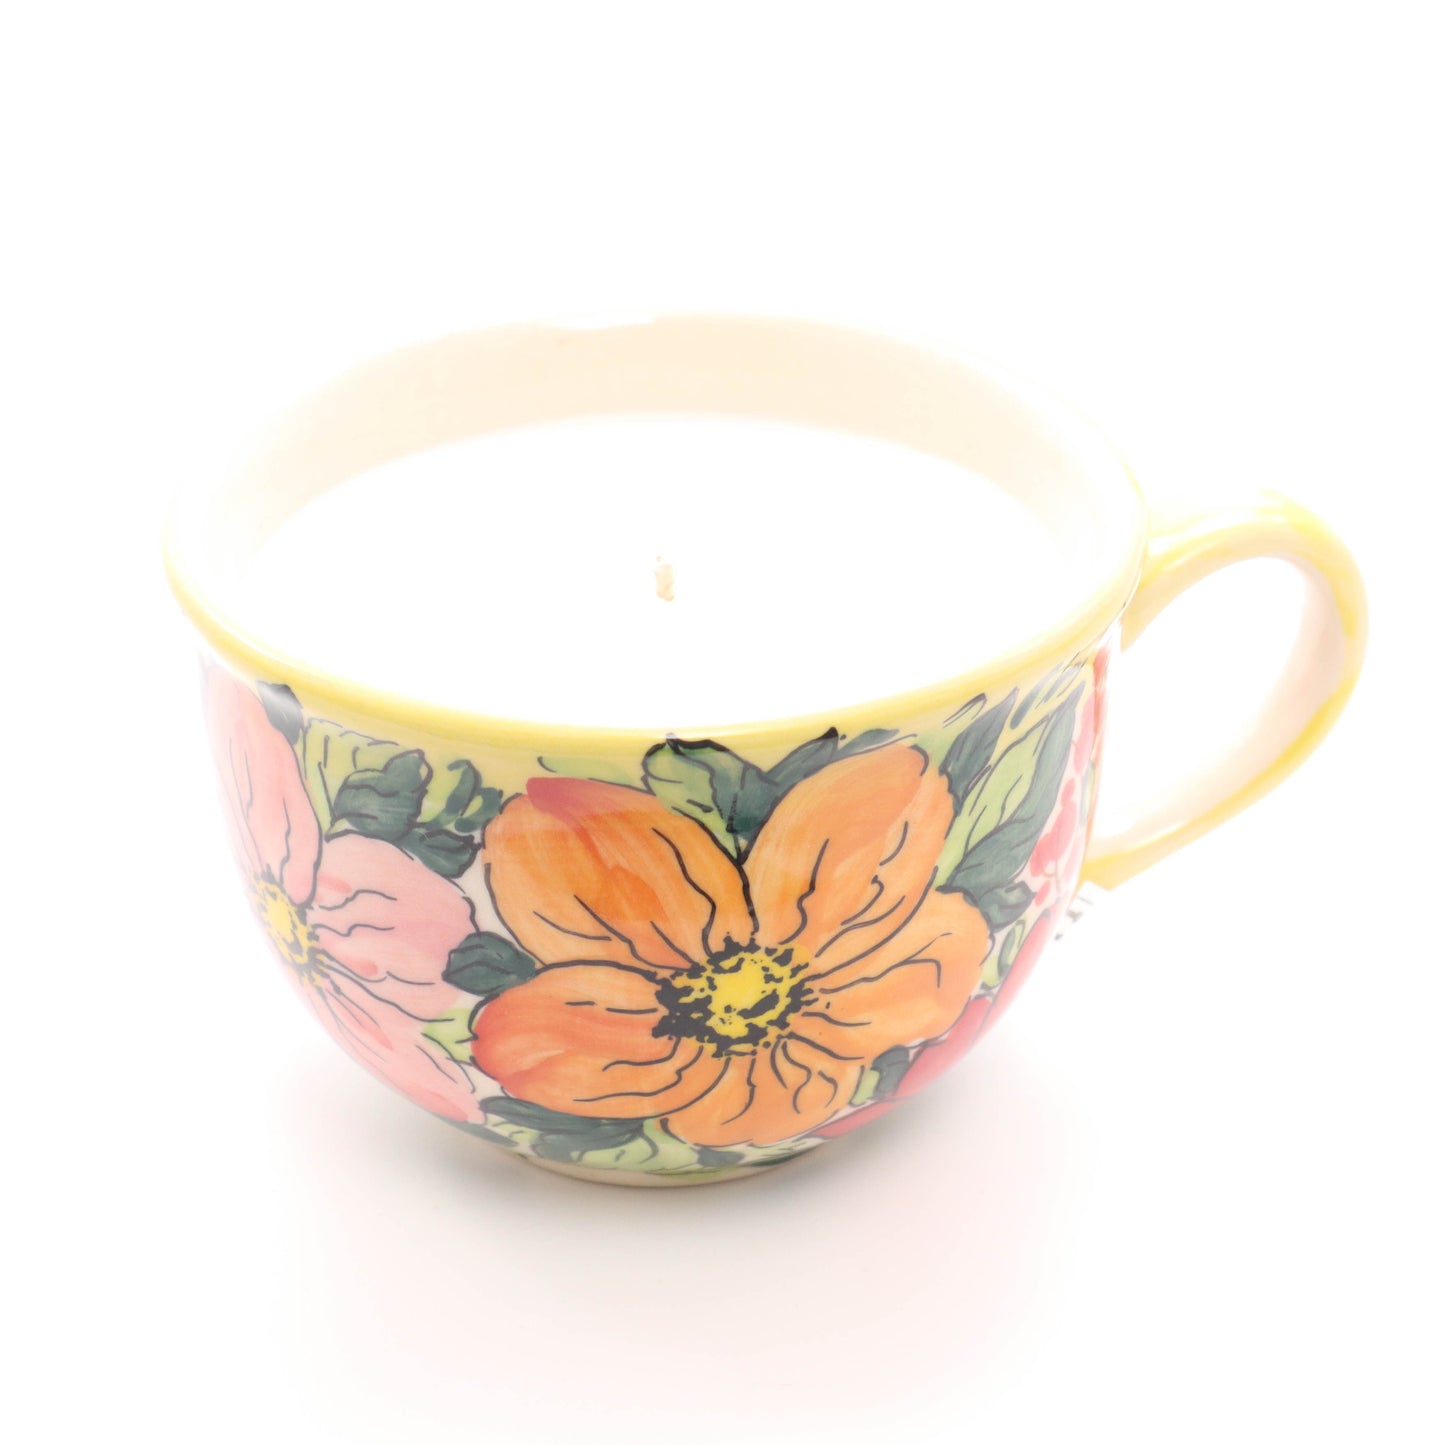 8oz Tea Cup Candle with Saucer. Pattern: A38. Scent: Dogwood Blossom